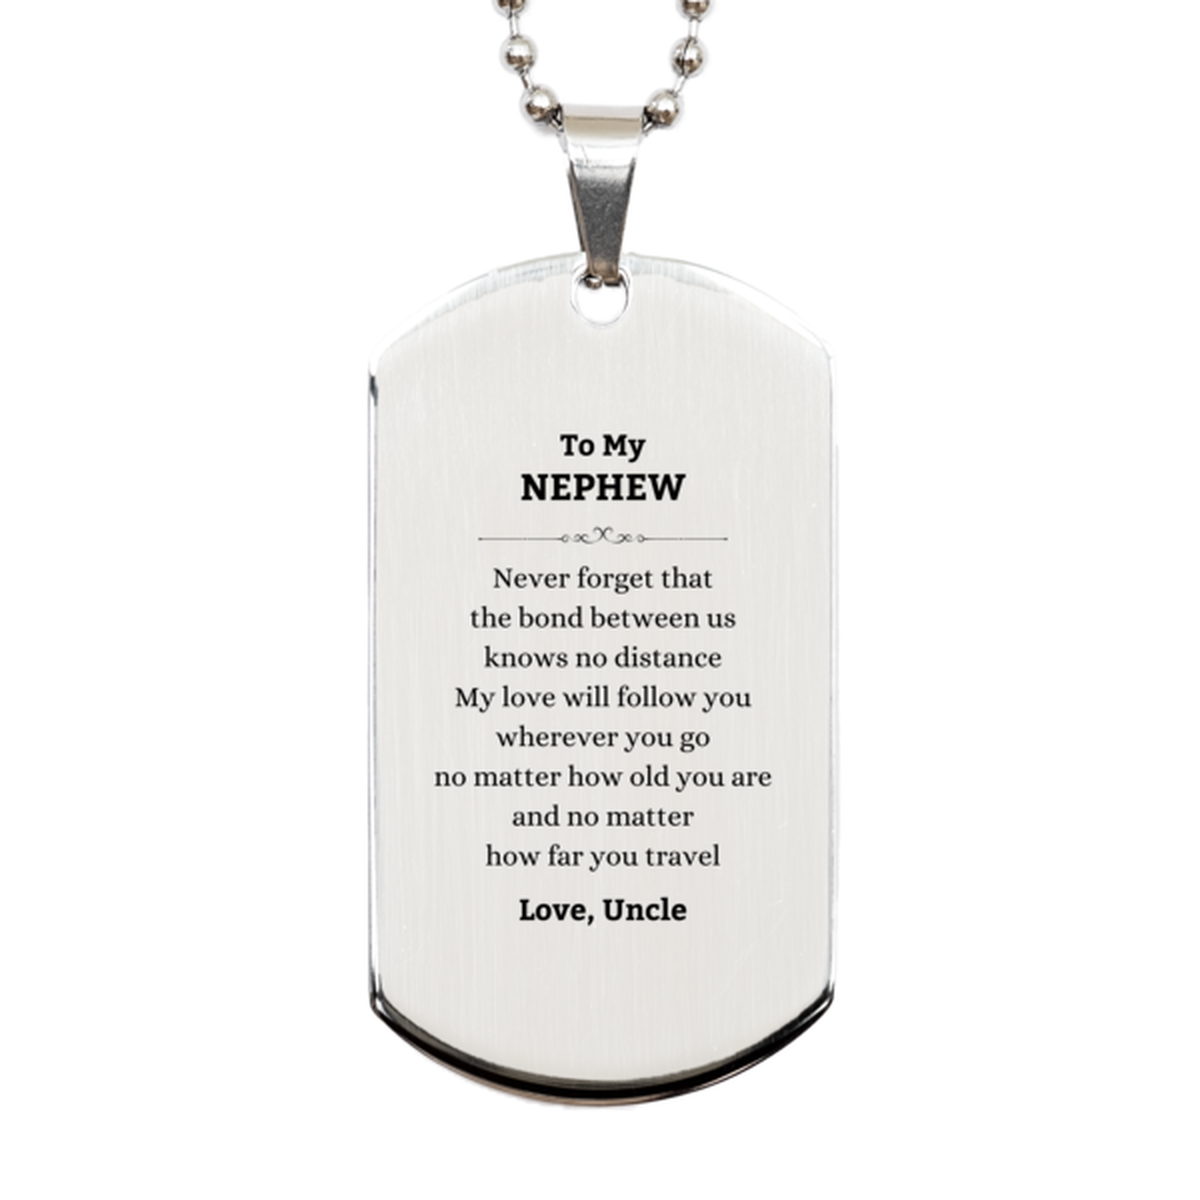 Nephew Birthday Gifts from Uncle, Adjustable Silver Dog Tag for Nephew Christmas Graduation Unique Gifts Nephew Never forget that the bond between us knows no distance. Love, Uncle